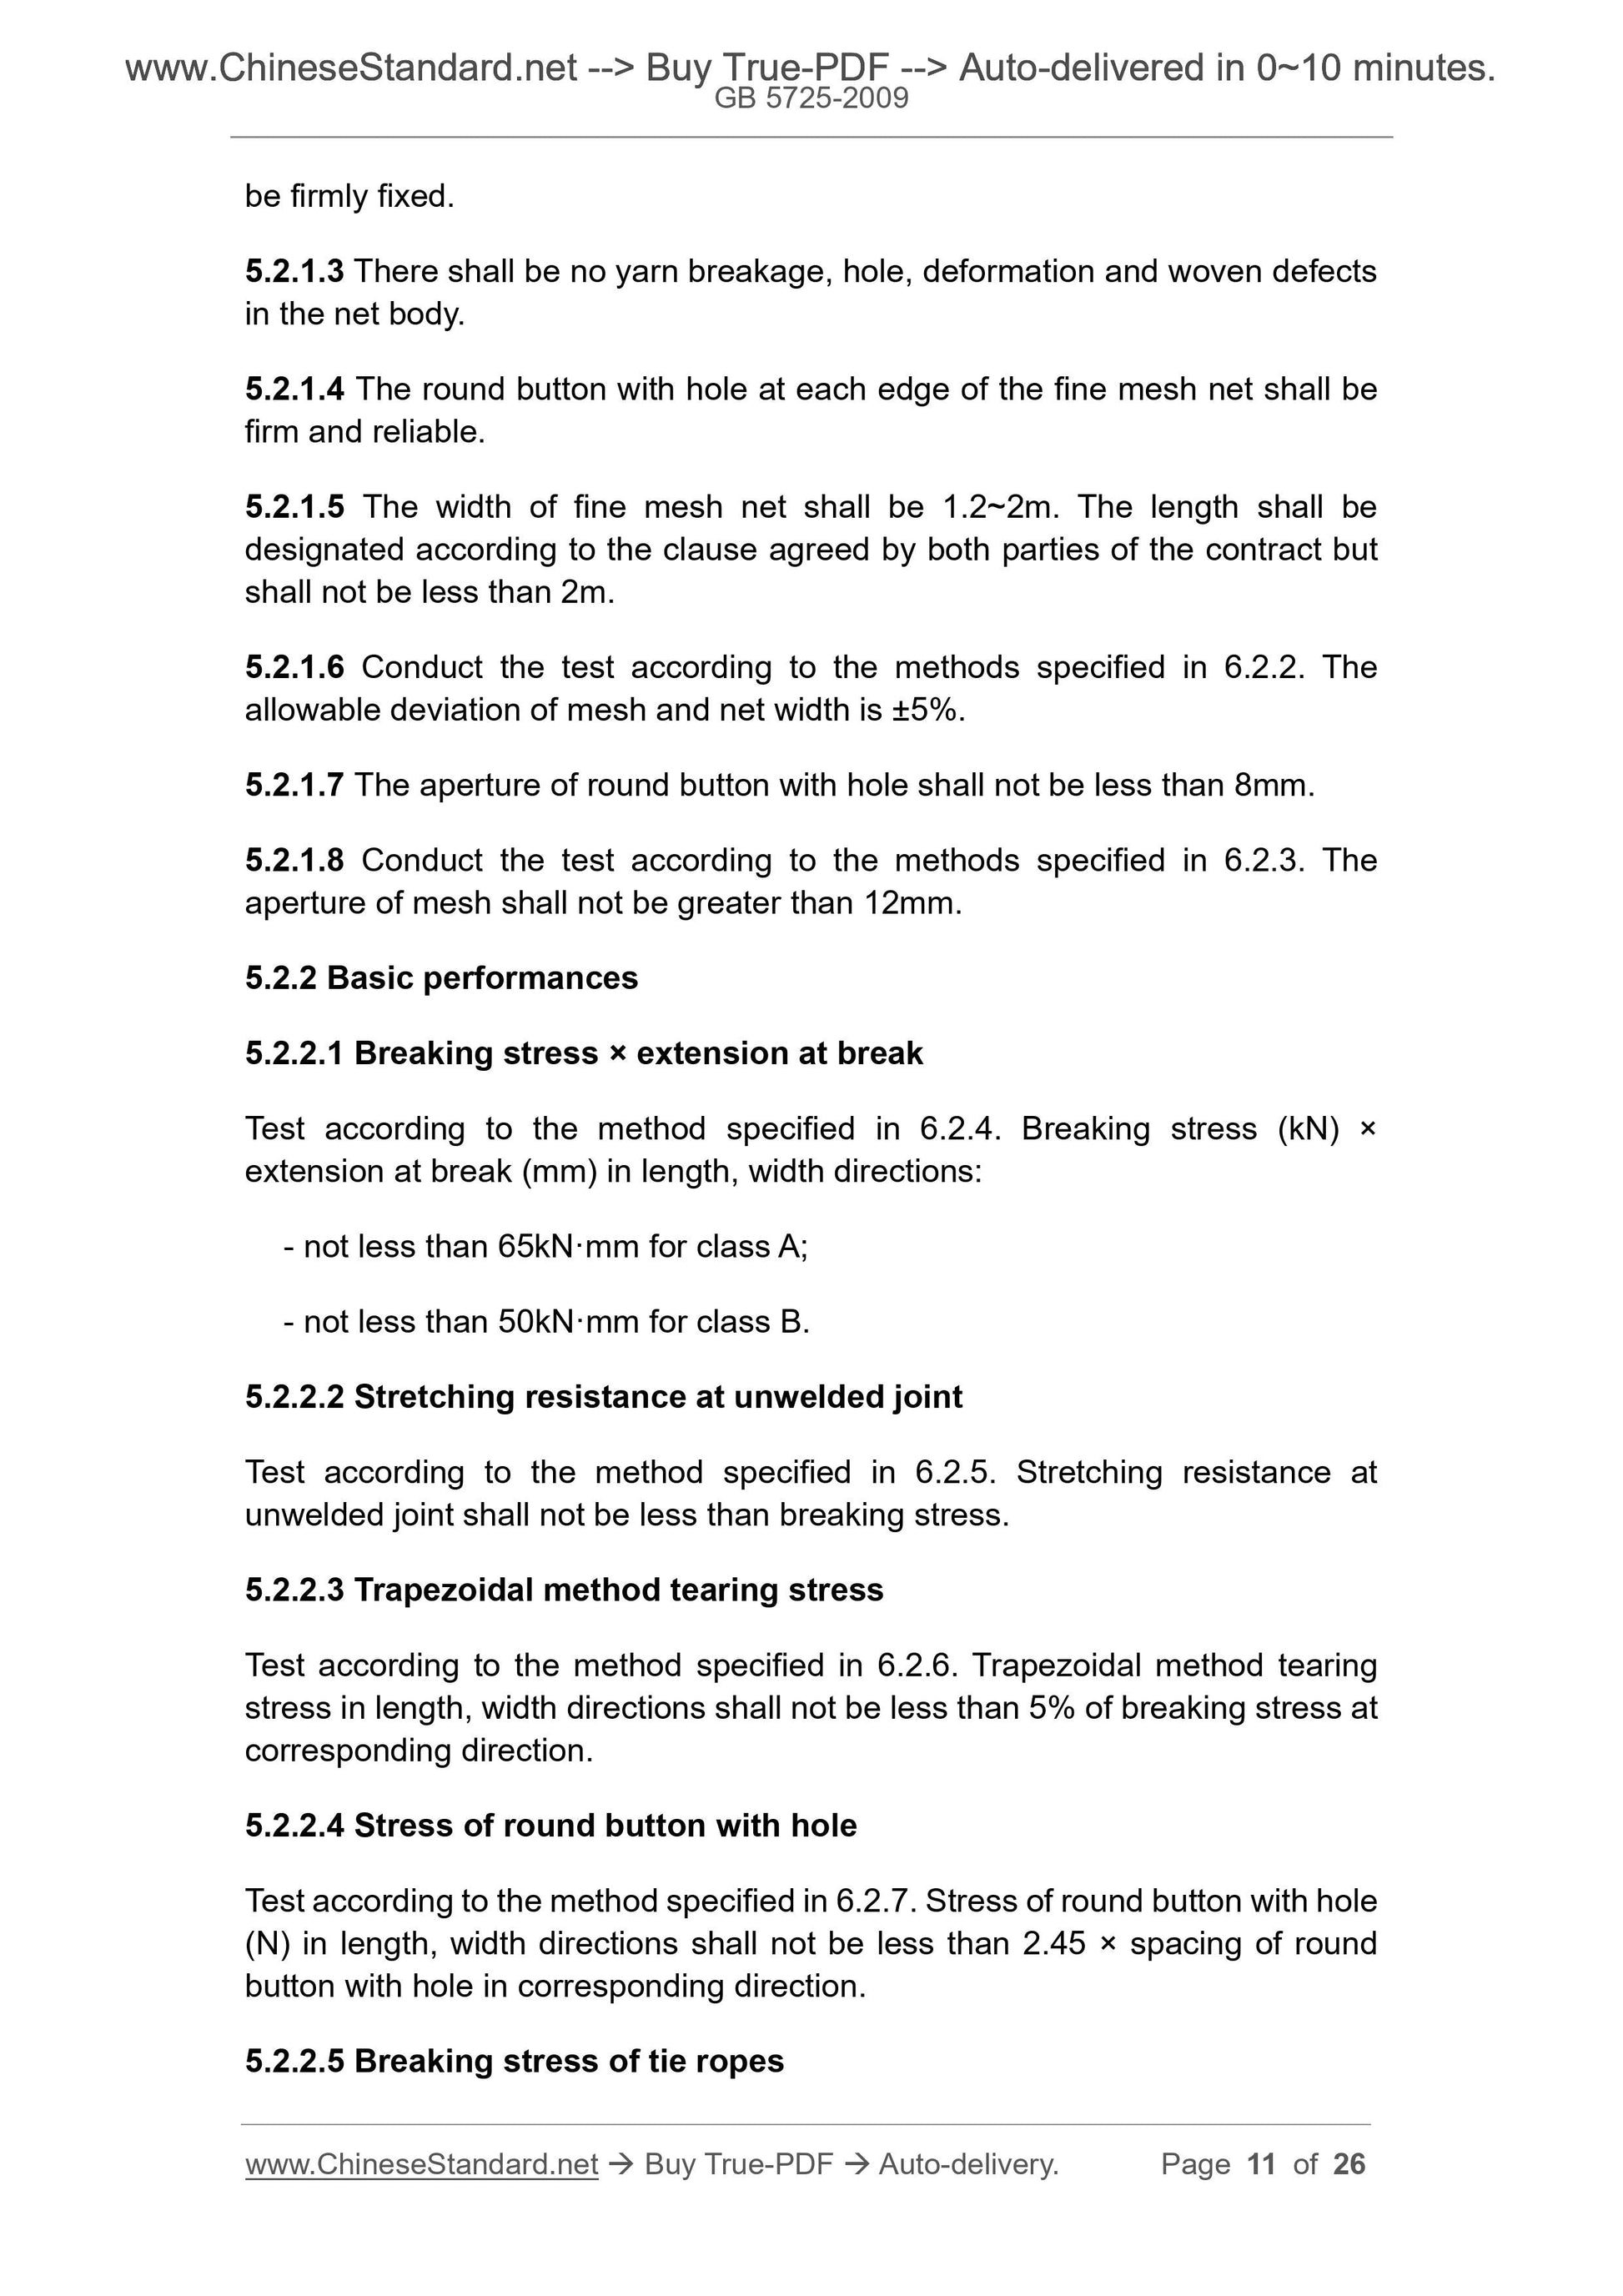 GB 5725-2009 Page 5